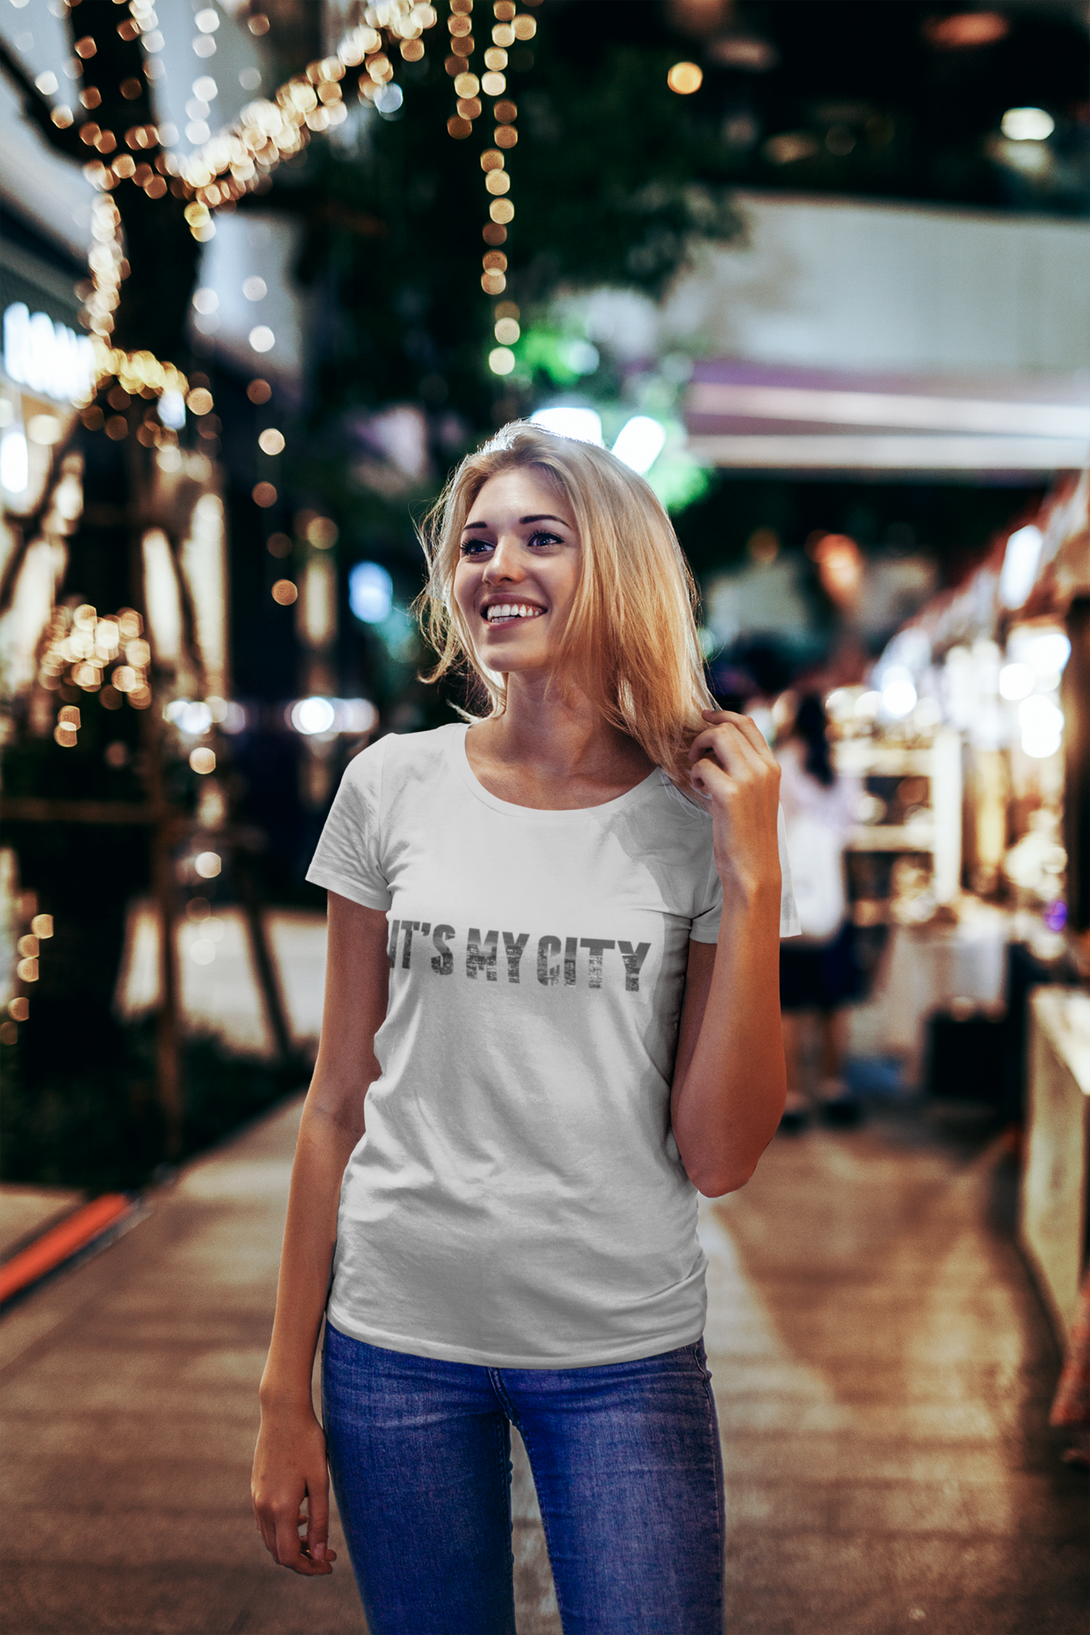 It Is My City Printed Scoop Neck T-Shirt For Women - WowWaves - 2